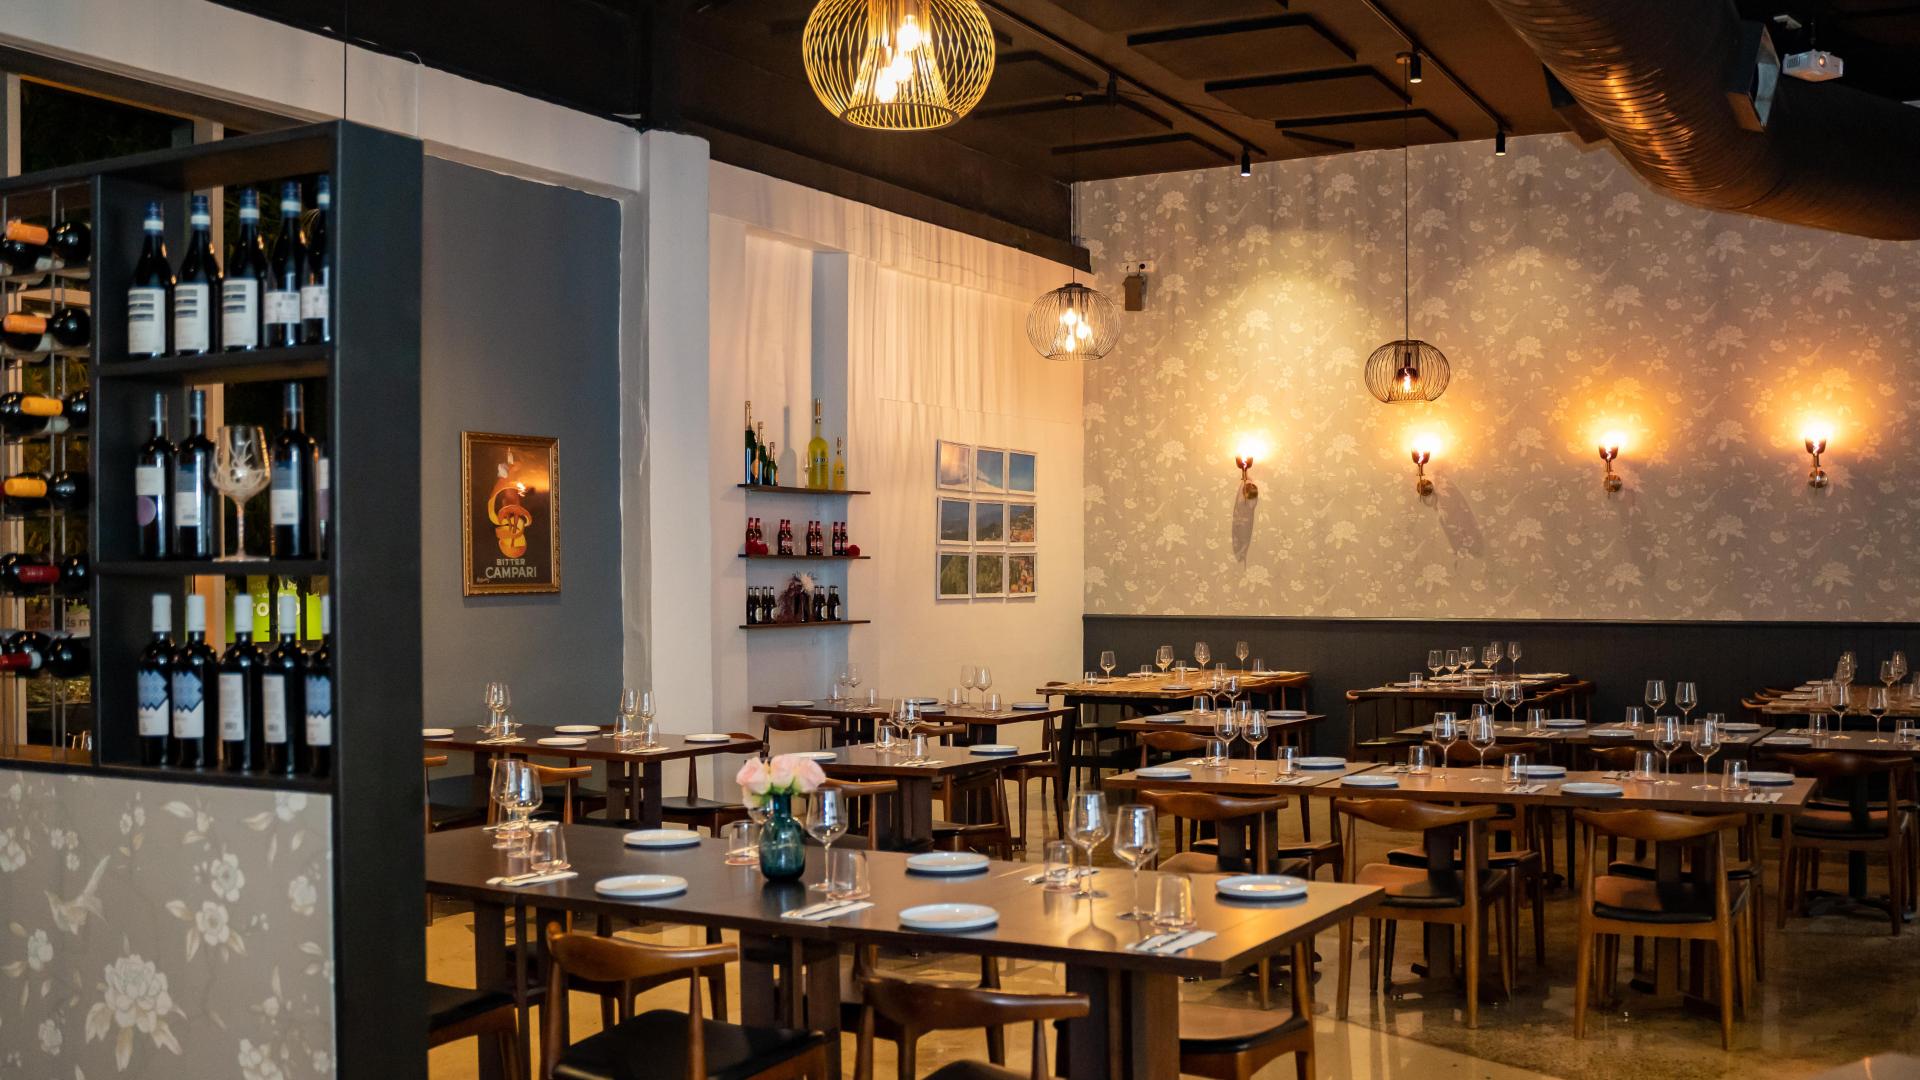 Restaurants with Function Rooms for Hire in Brisbane